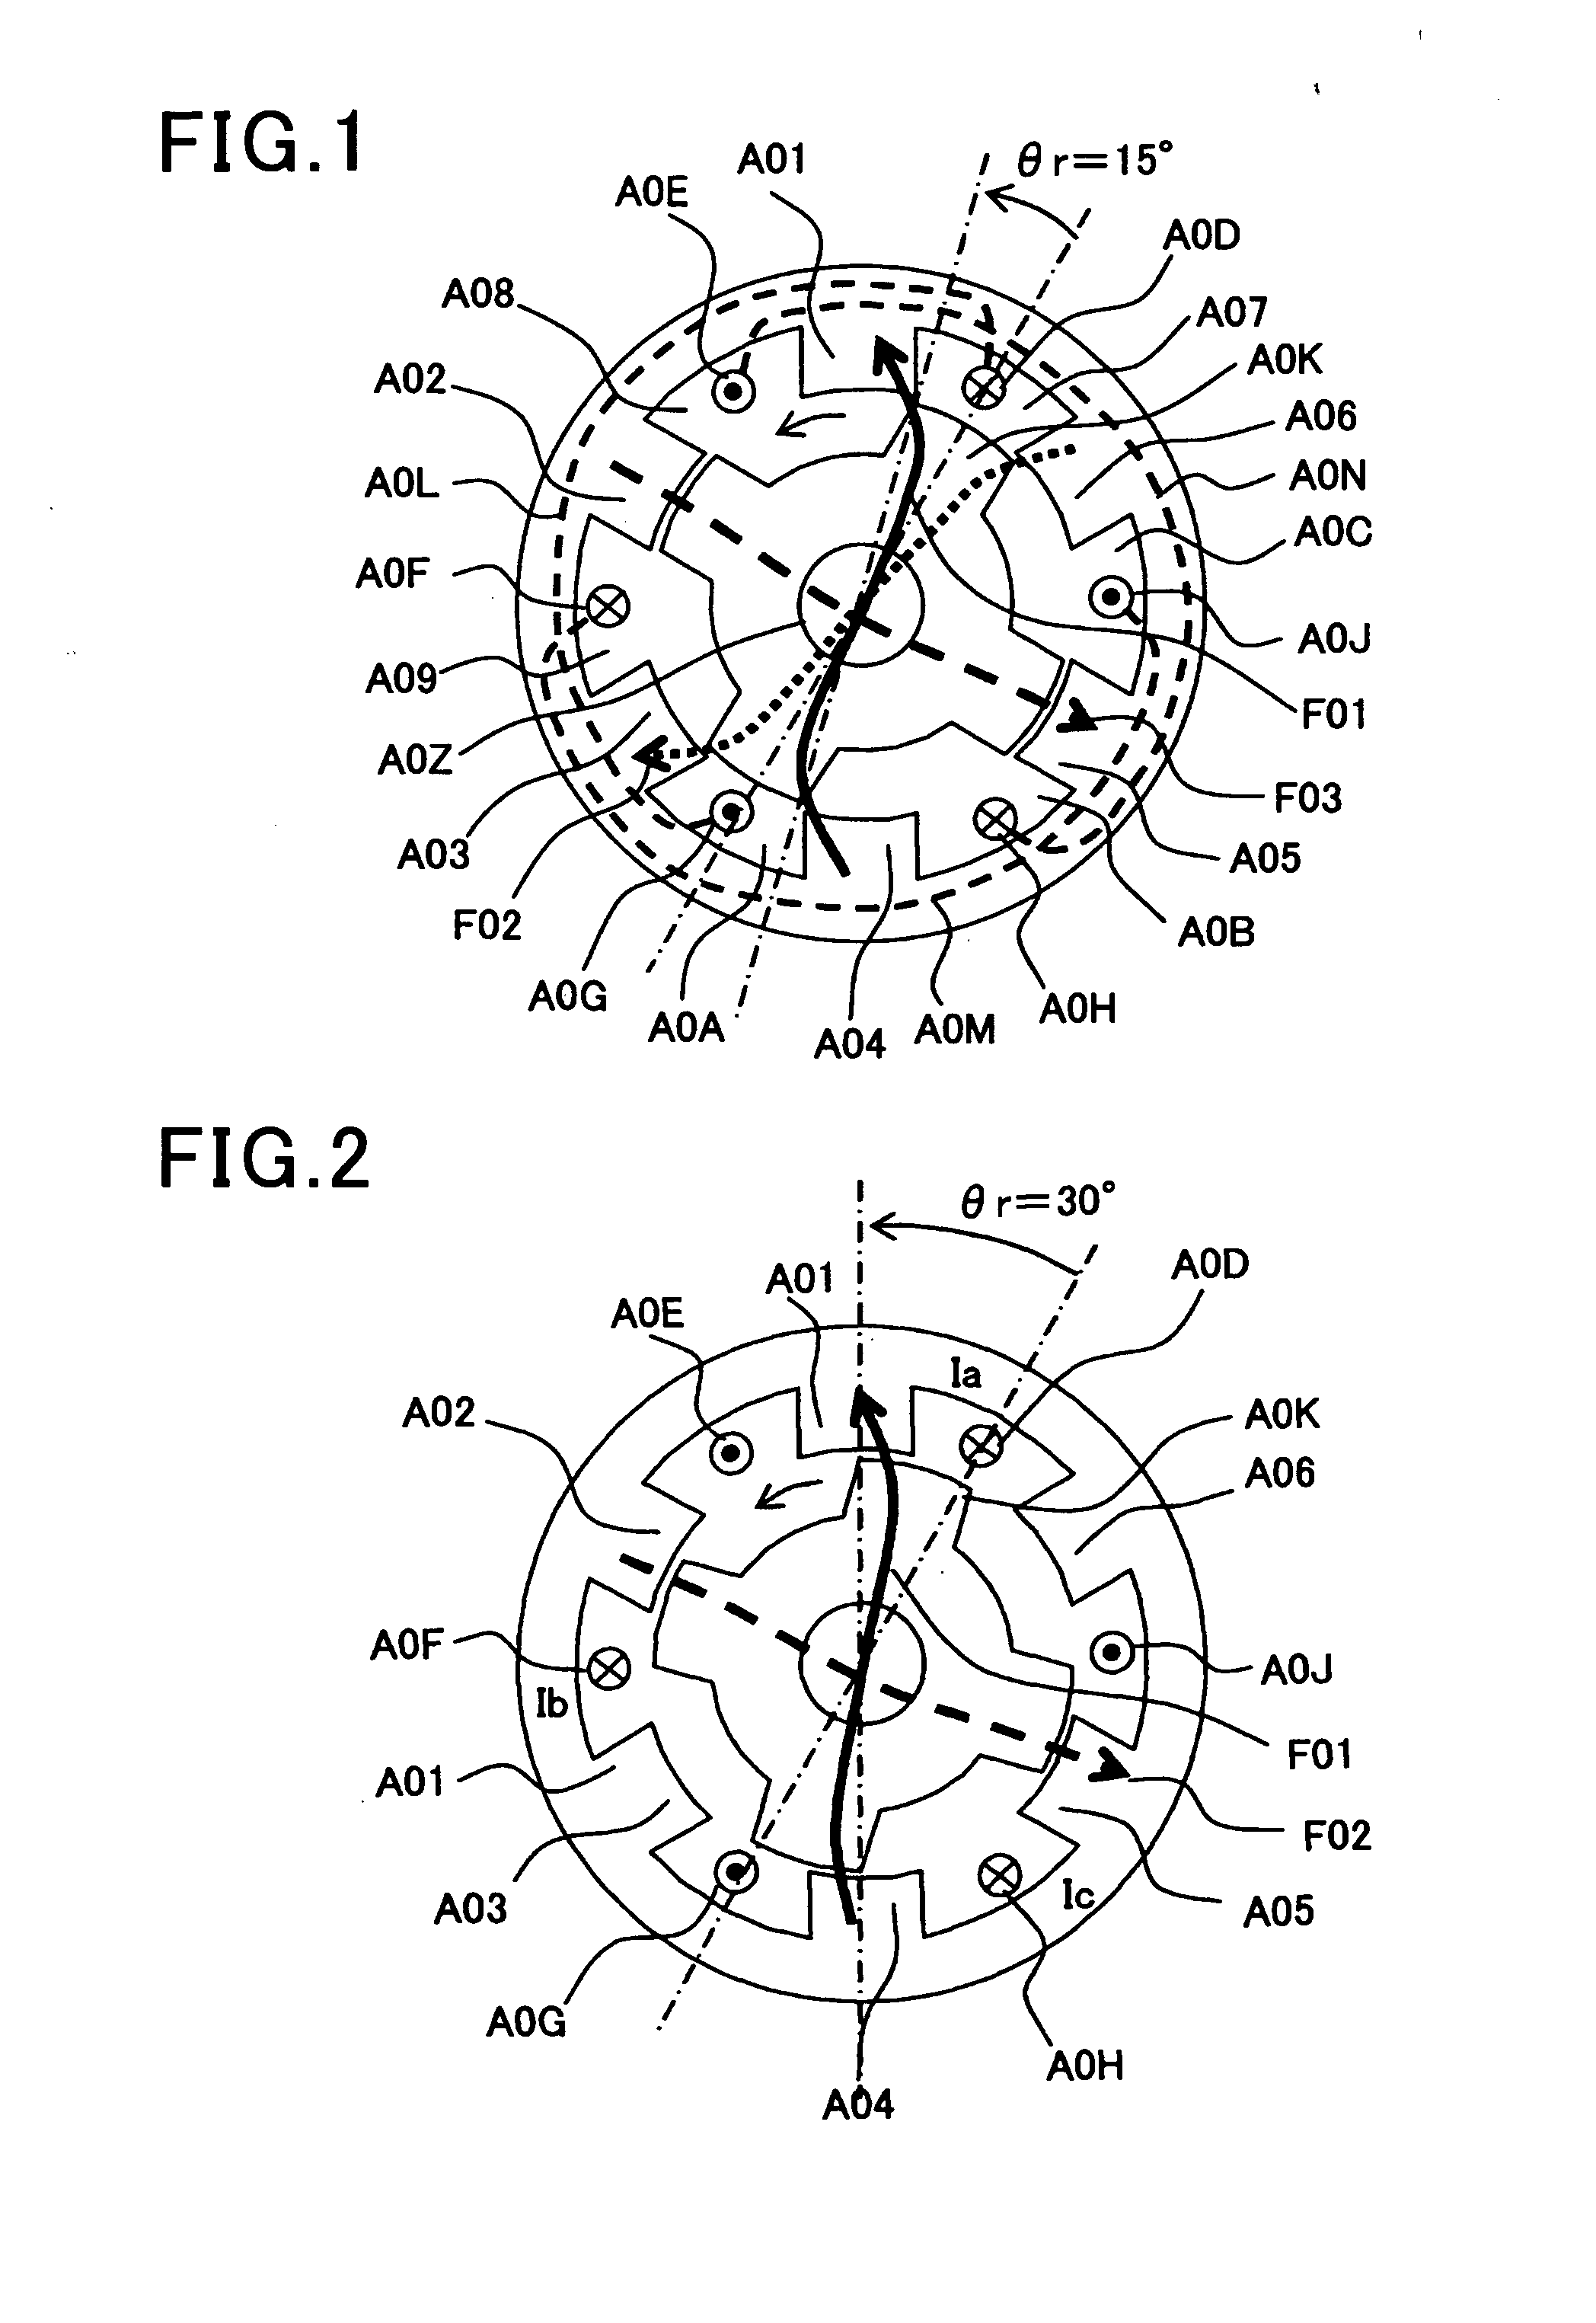 Full-pitch windings switched reluctance motor